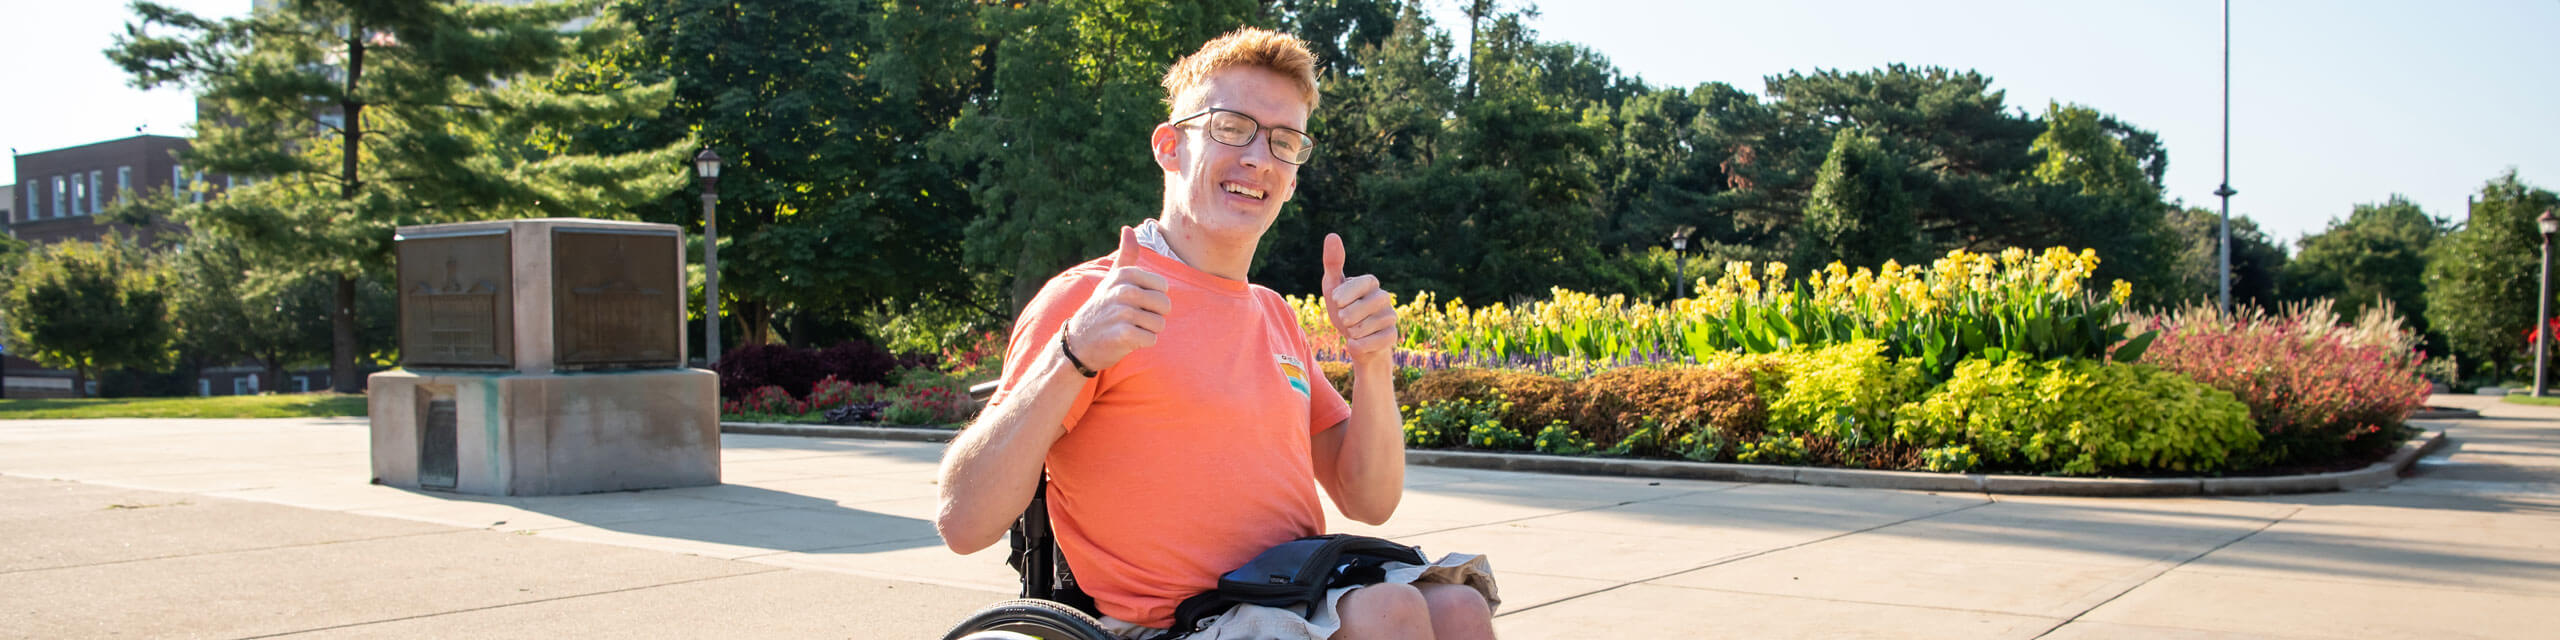 Student in a wheelchair gives two thumbs up to the camera.